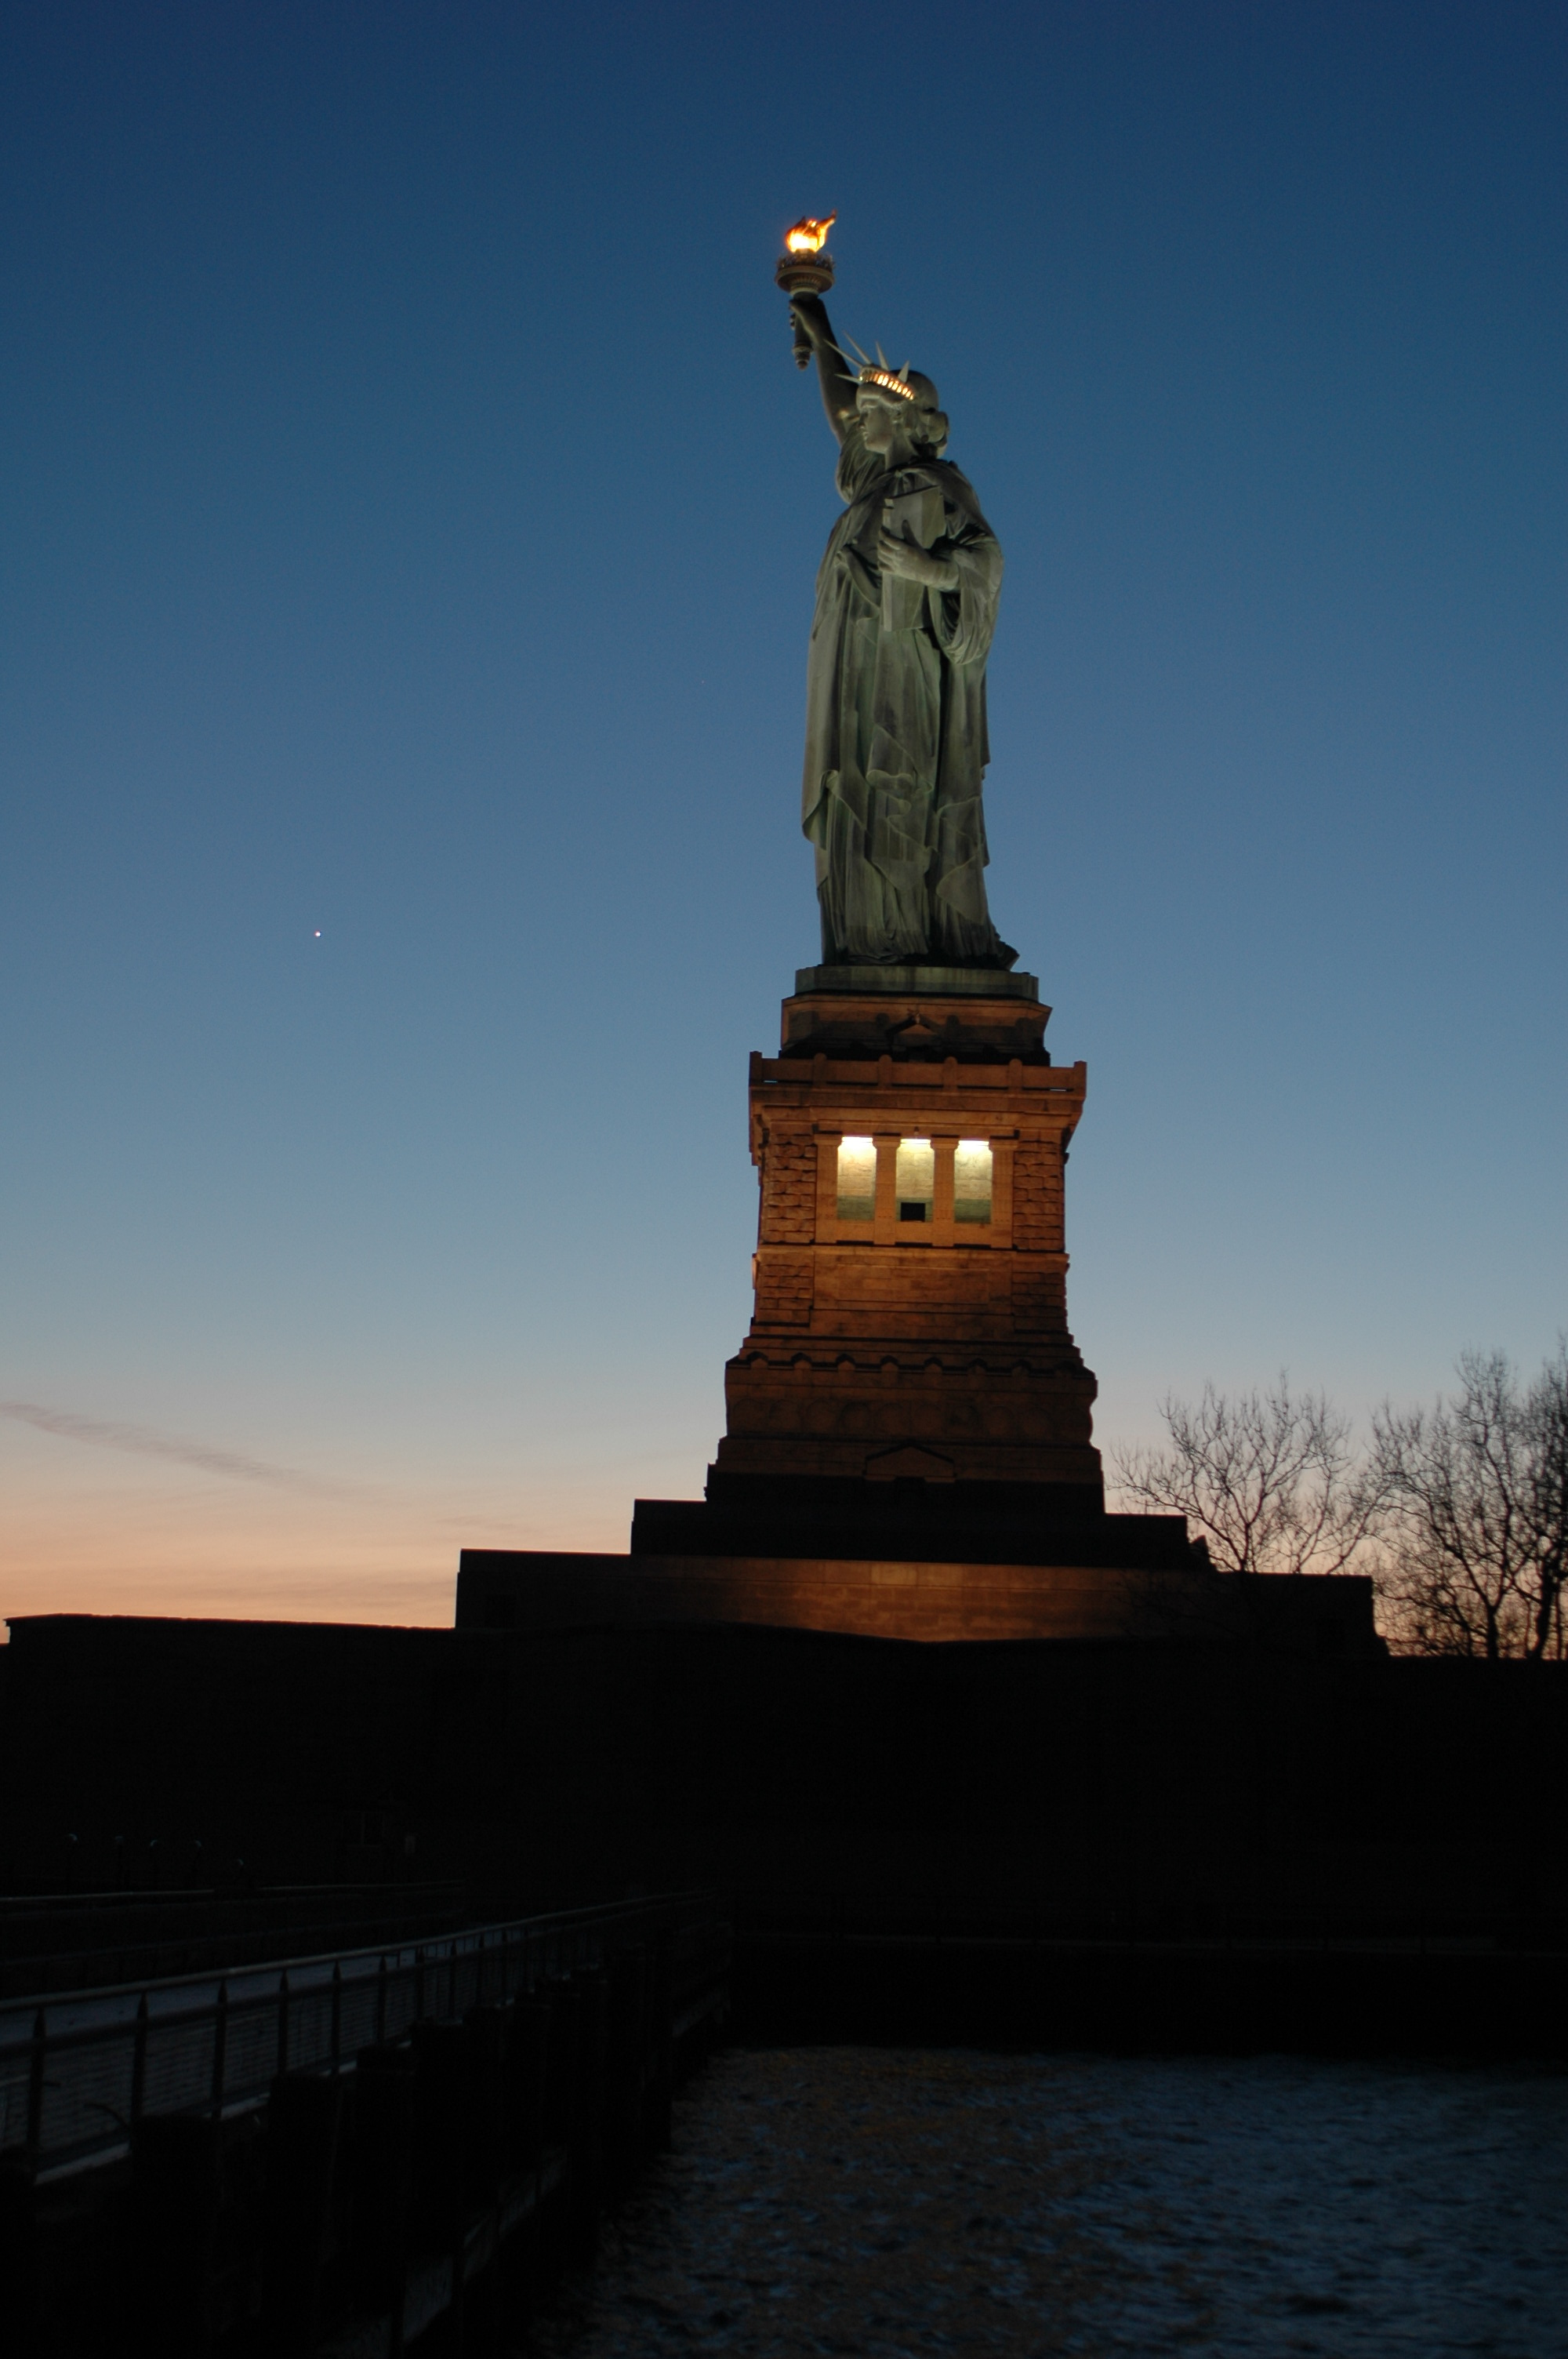 125 days of 125 years of history - Statue Of Liberty National Monument